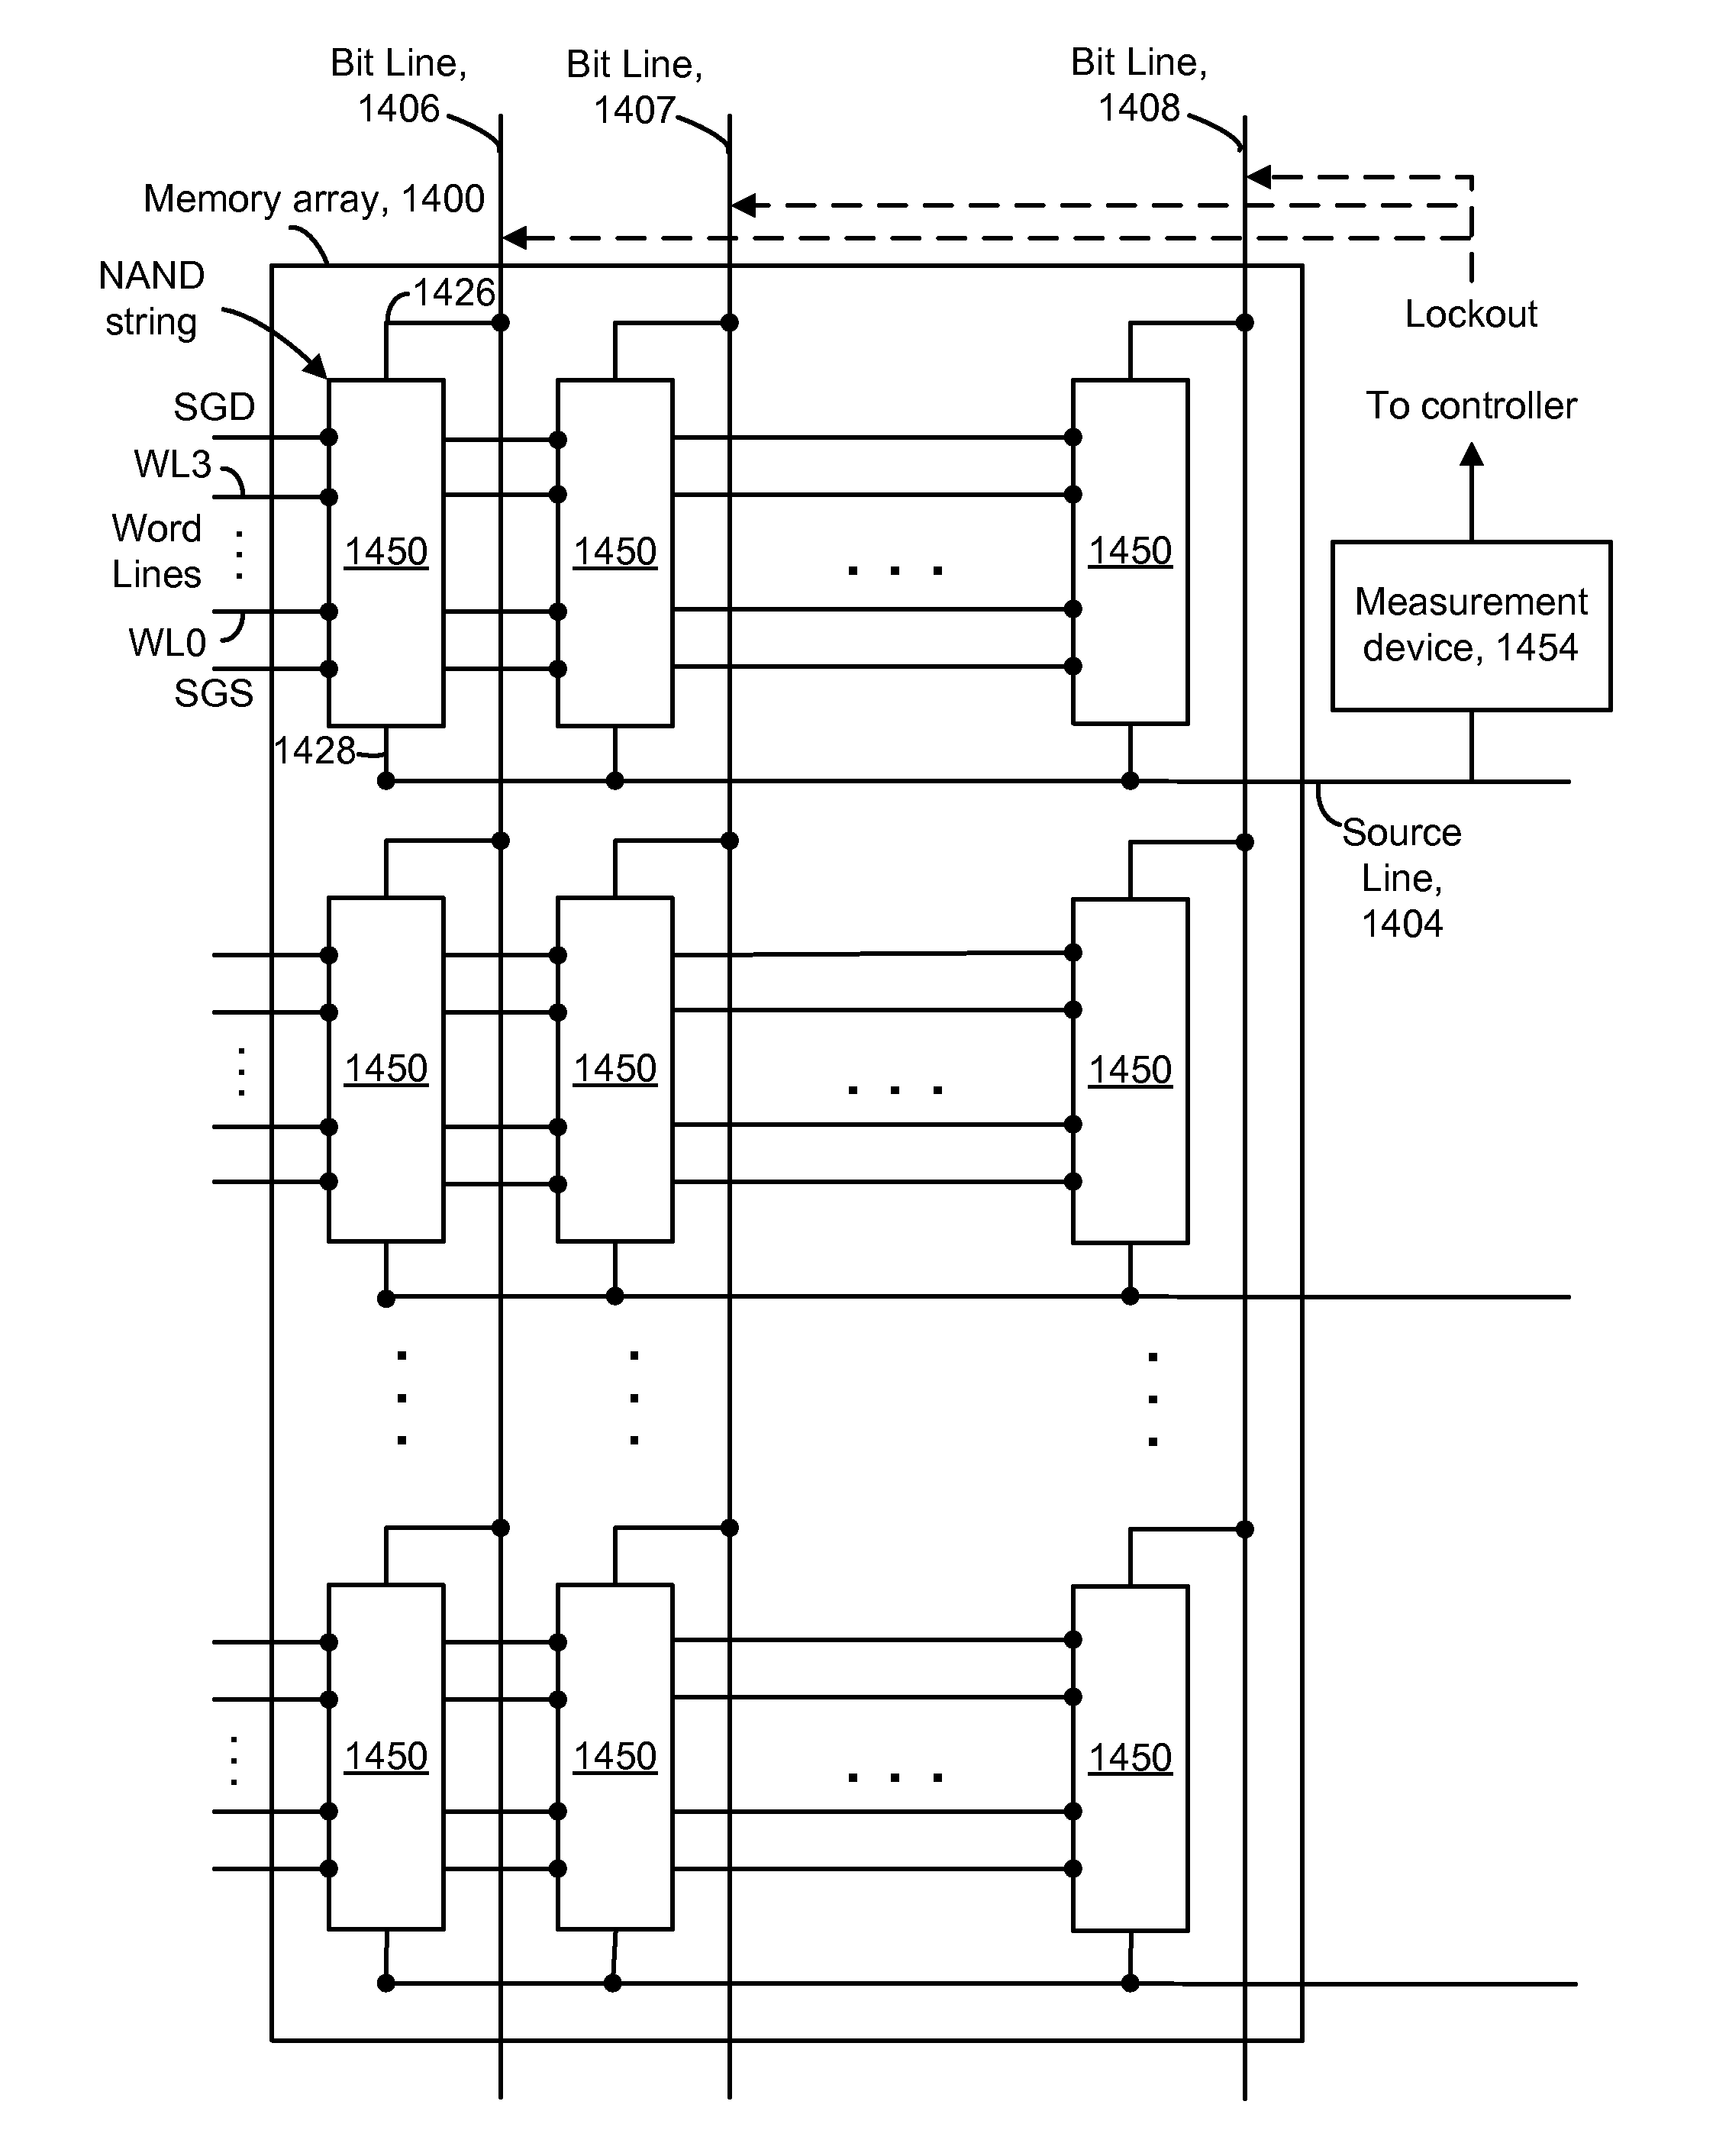 Measuring threshold voltage distribution in memory using an aggregate characteristic